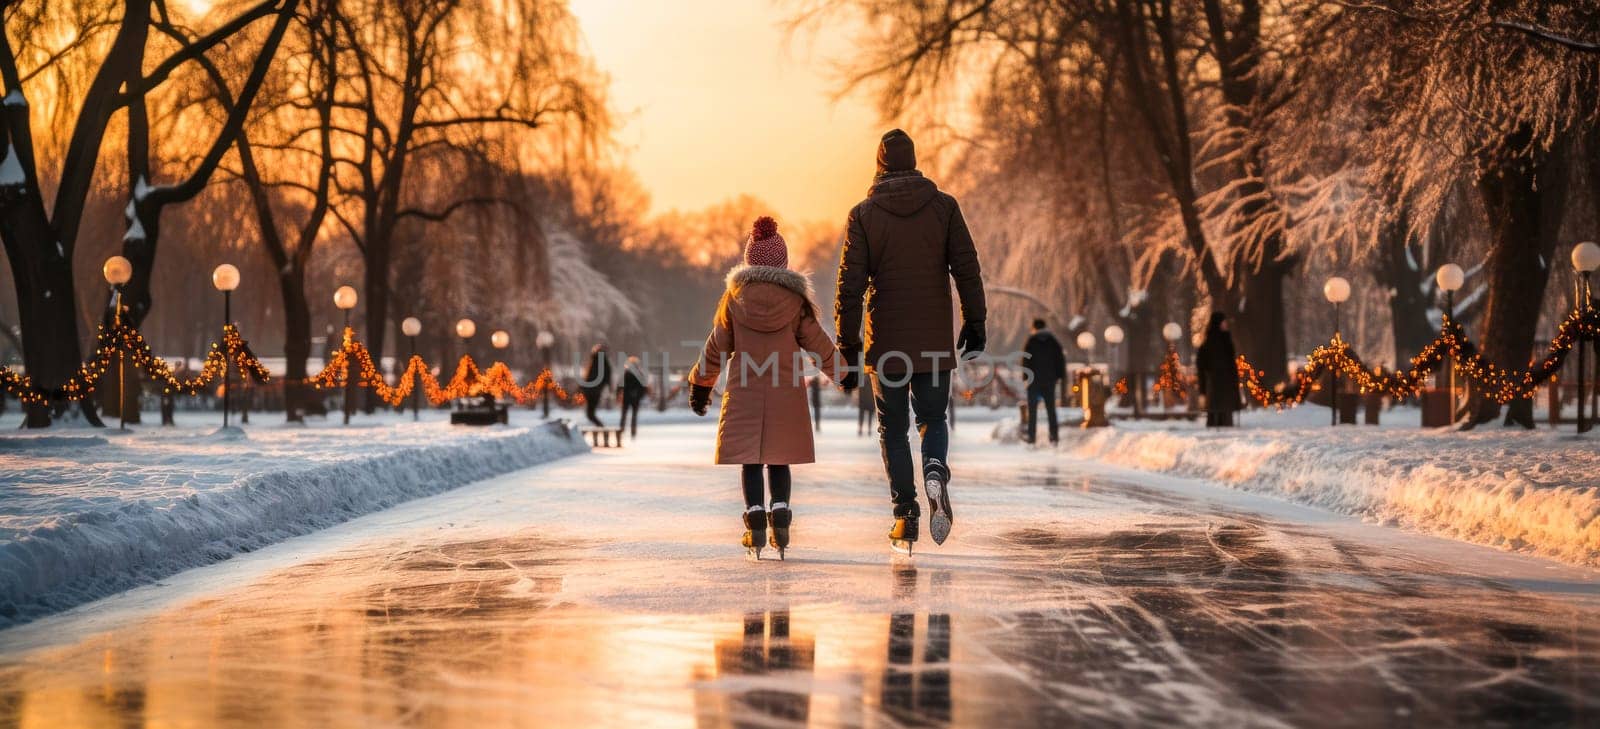 Family Ice Skating Dad With Daughter by Yurich32